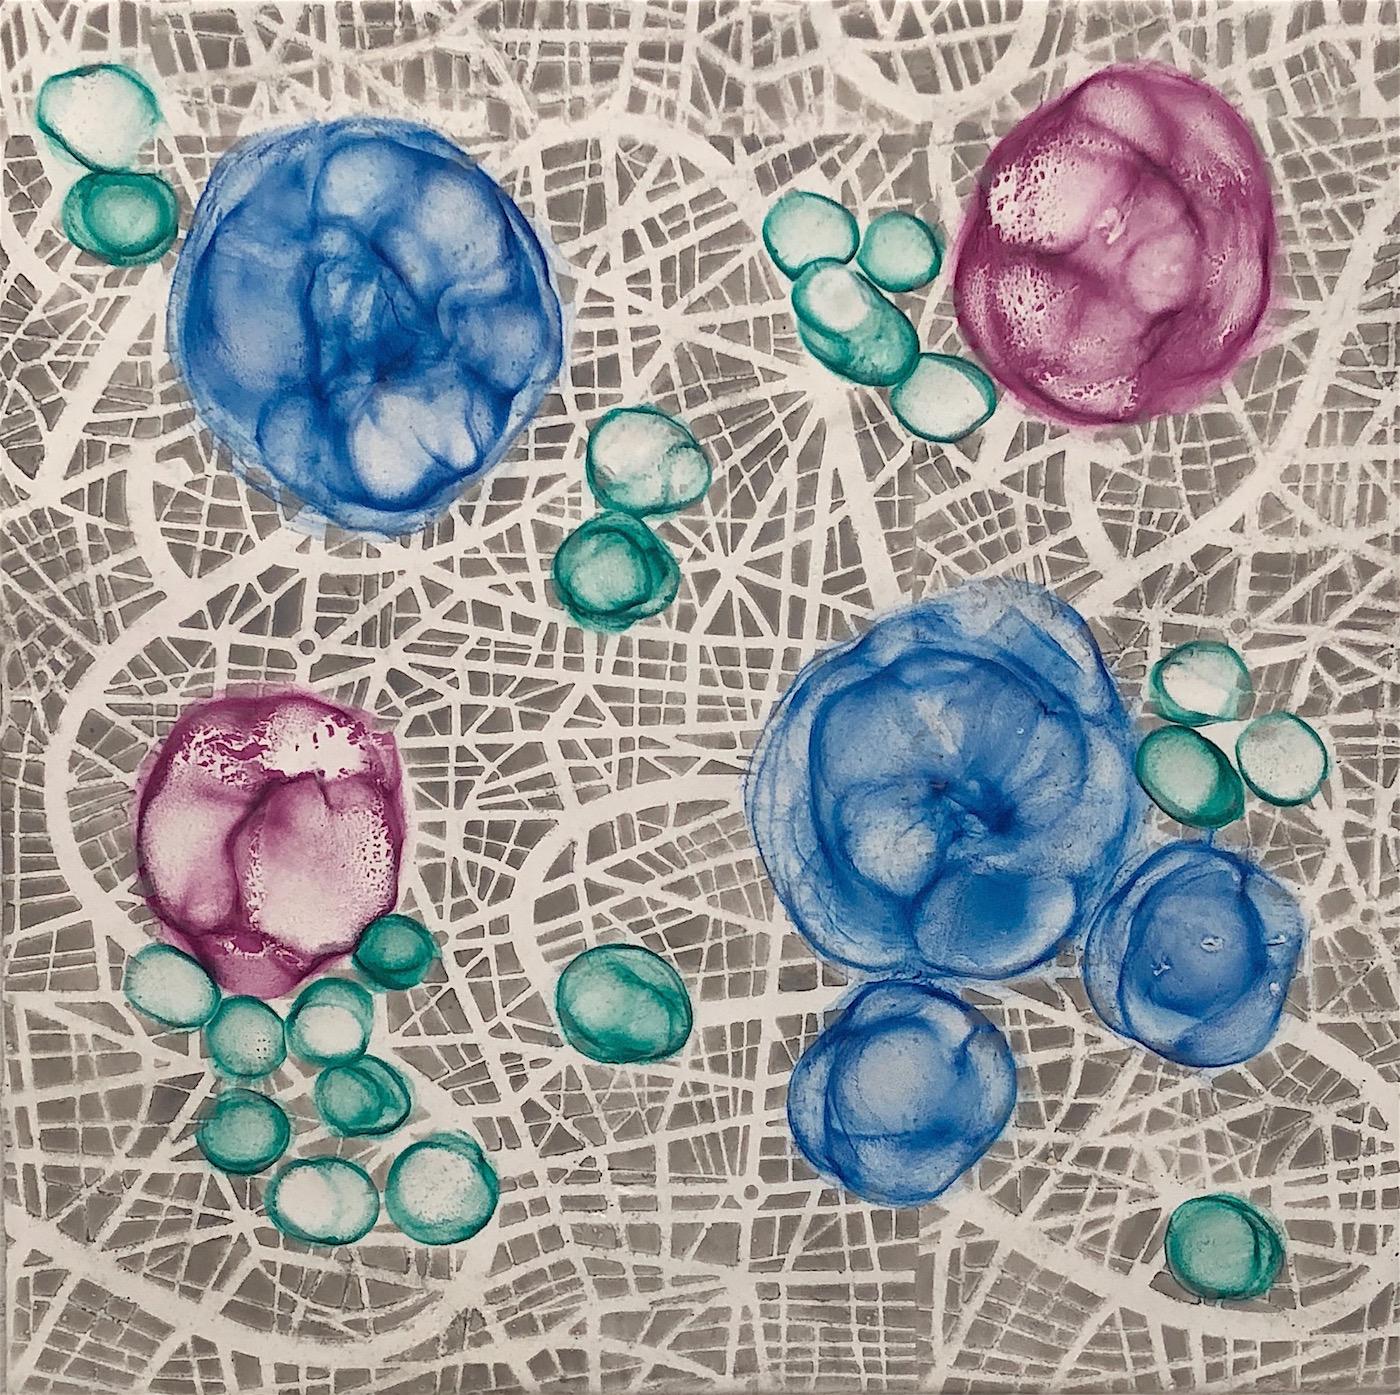 "Bio Networks 6", encaustic, pastel, abstract, microscopic, blue, pink, grey